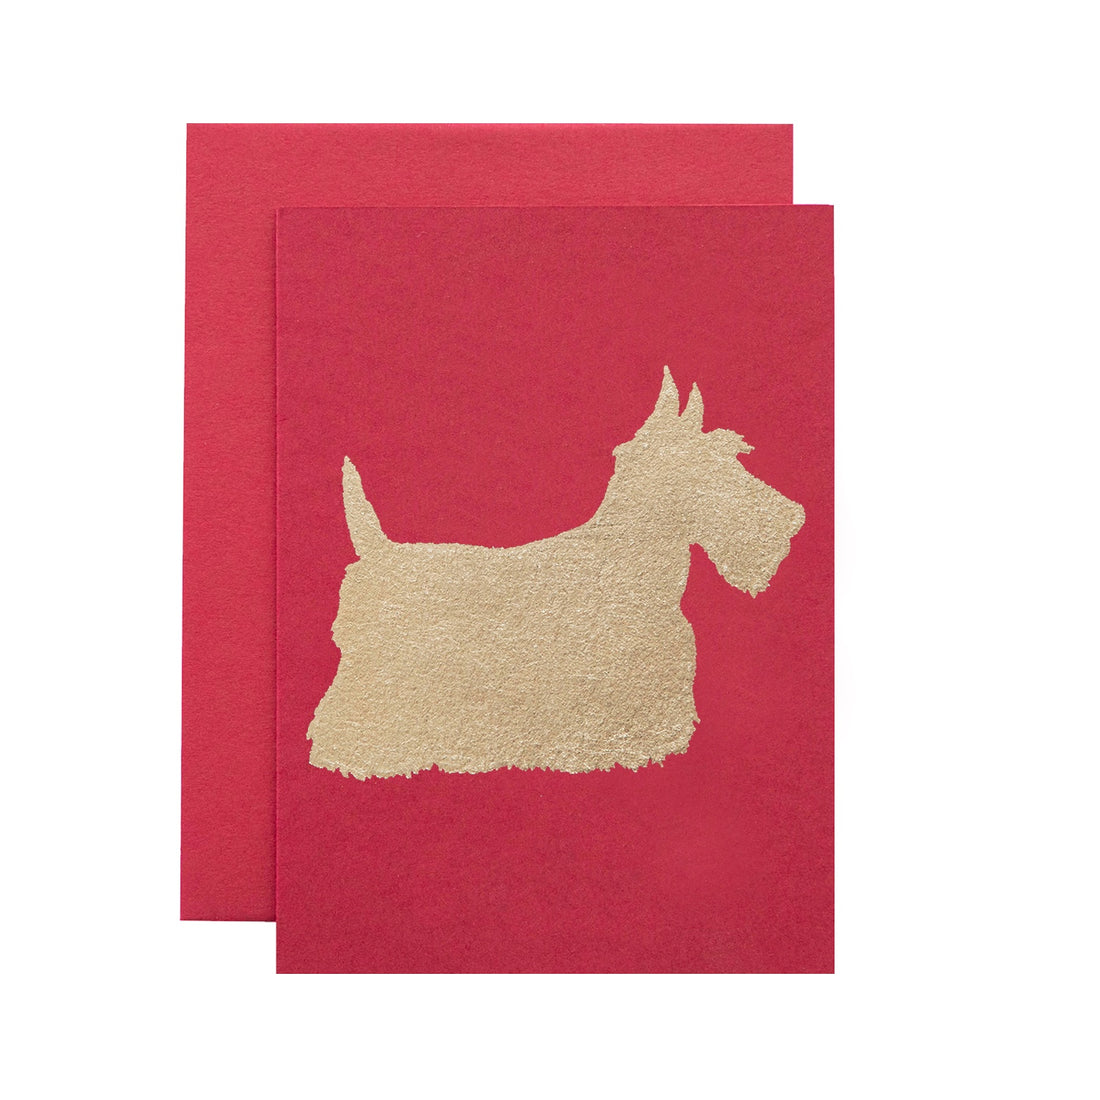 A red card featuring the silhouette of a scottie dog in solid gold leaf.